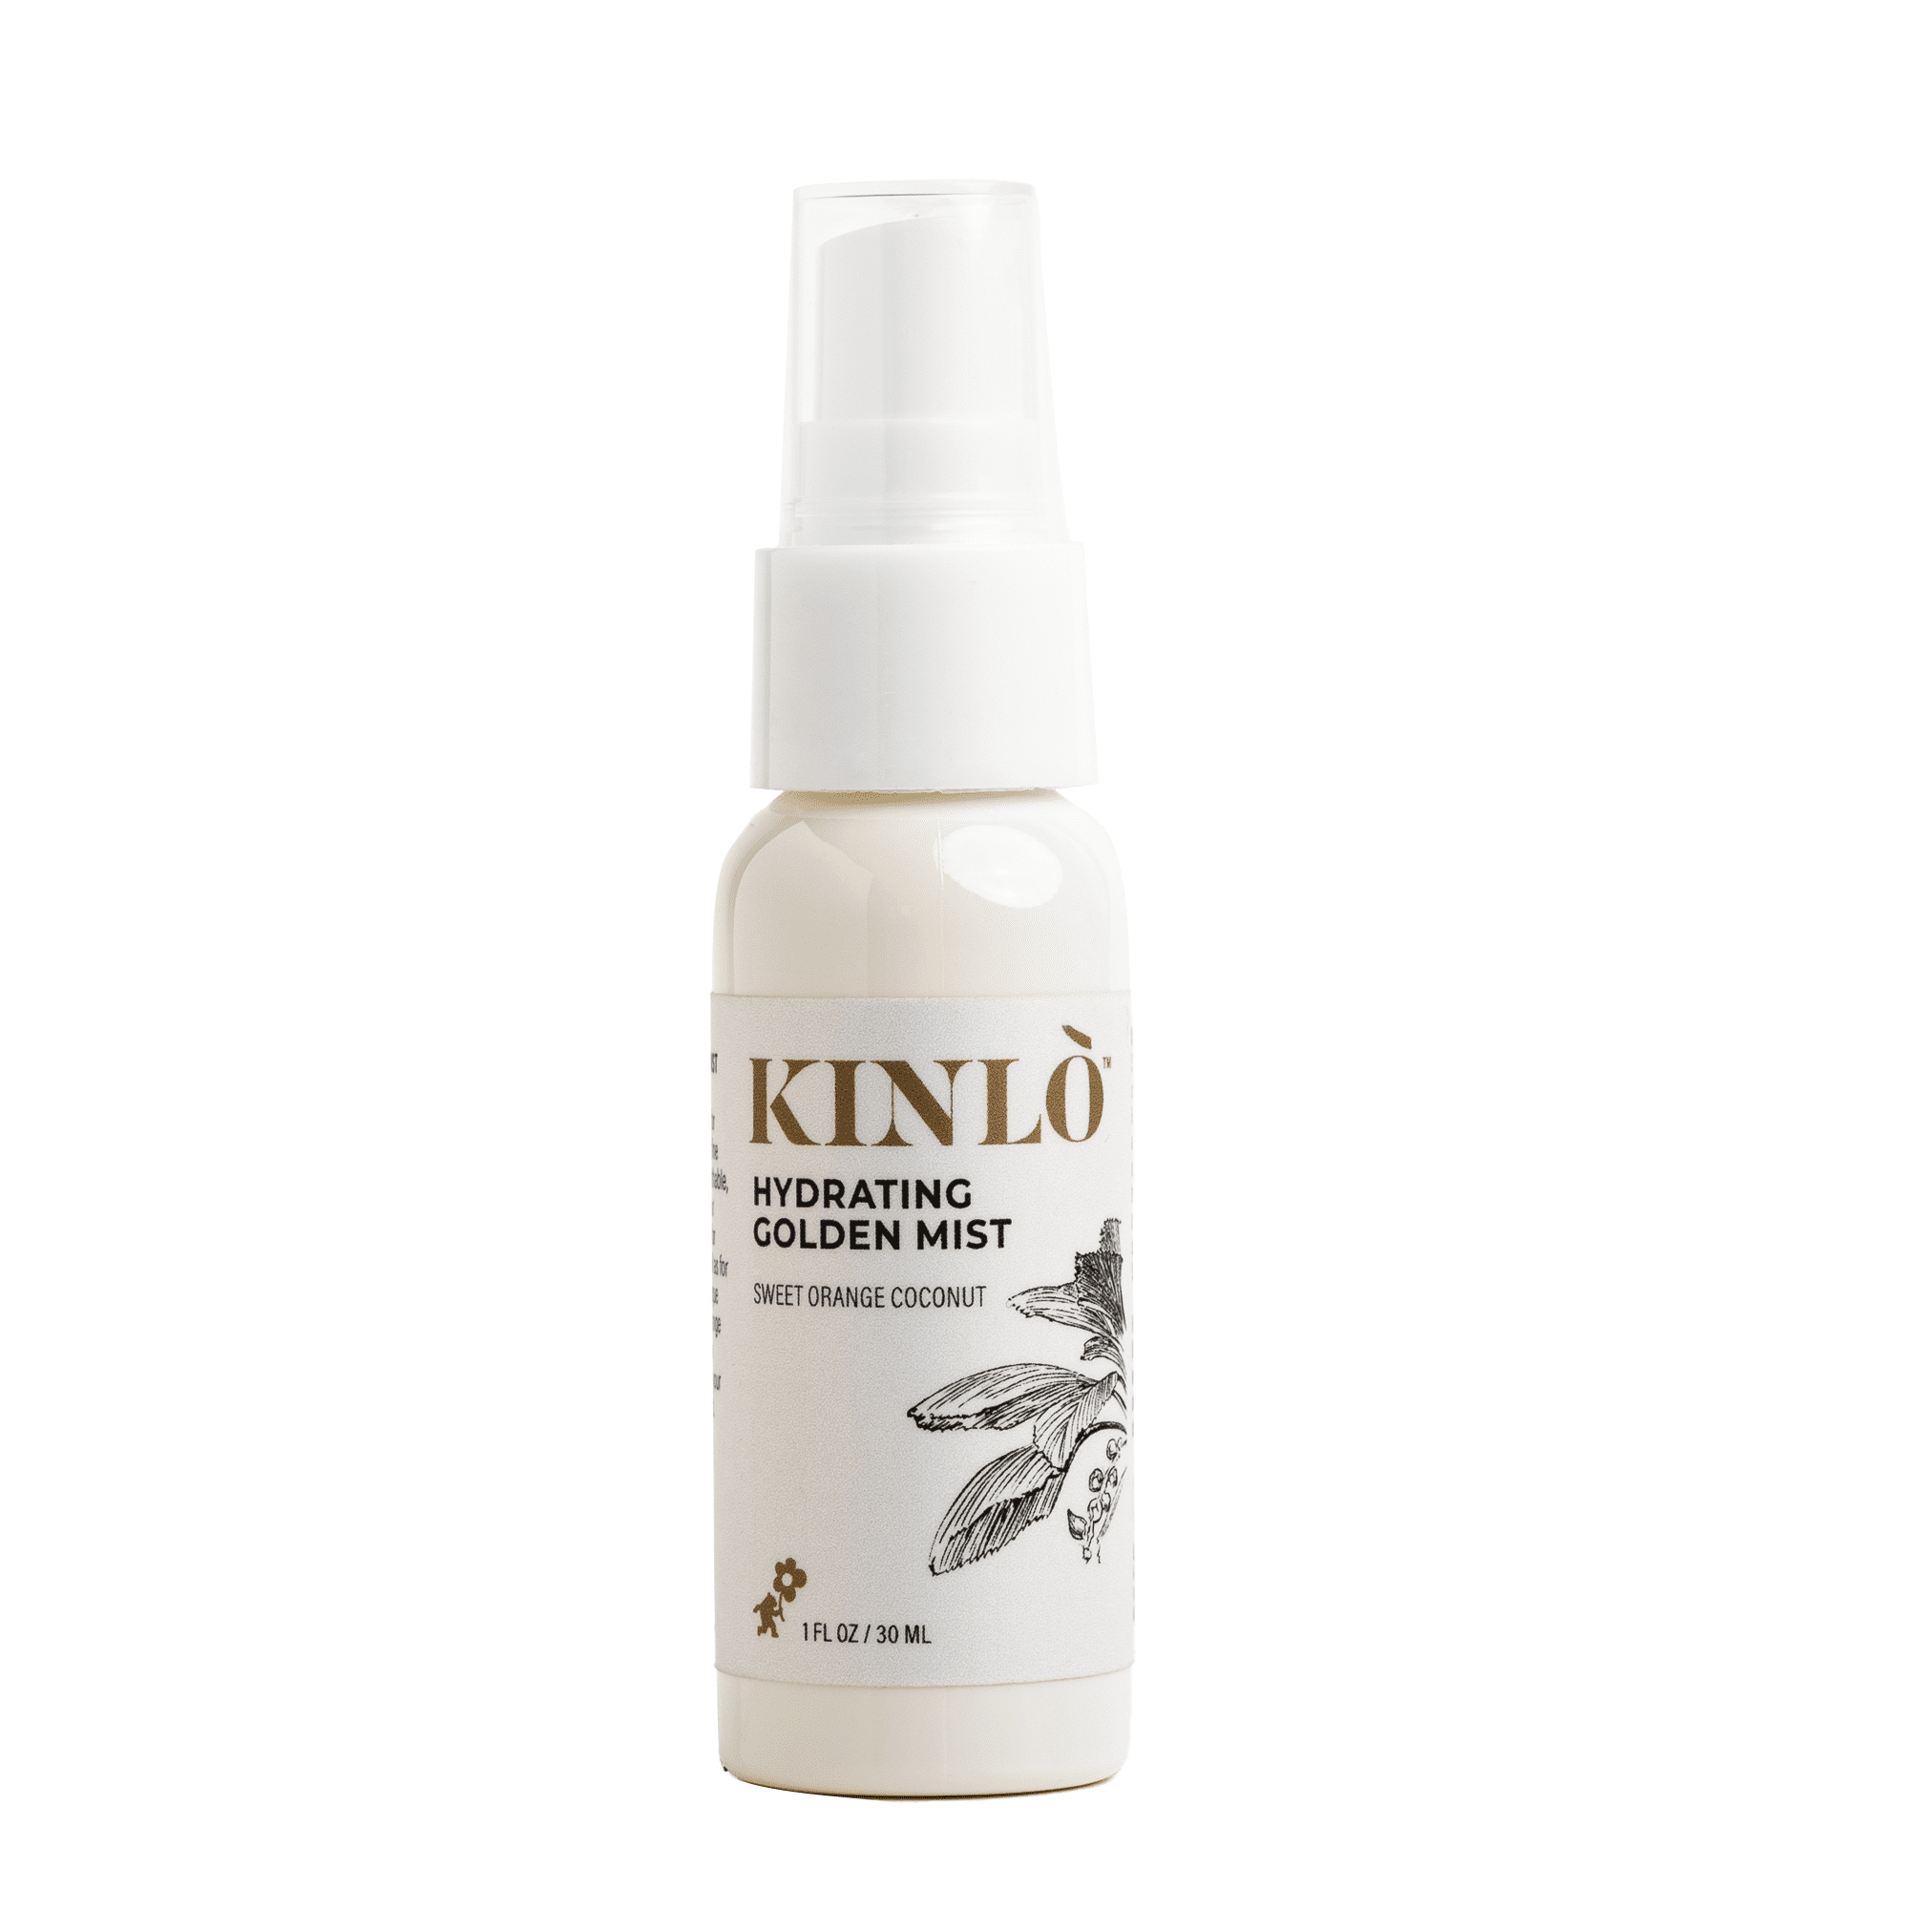 KINLO Hydrating Golden Facial Mist with Sweet Orange and Coconut Scent 1 oz